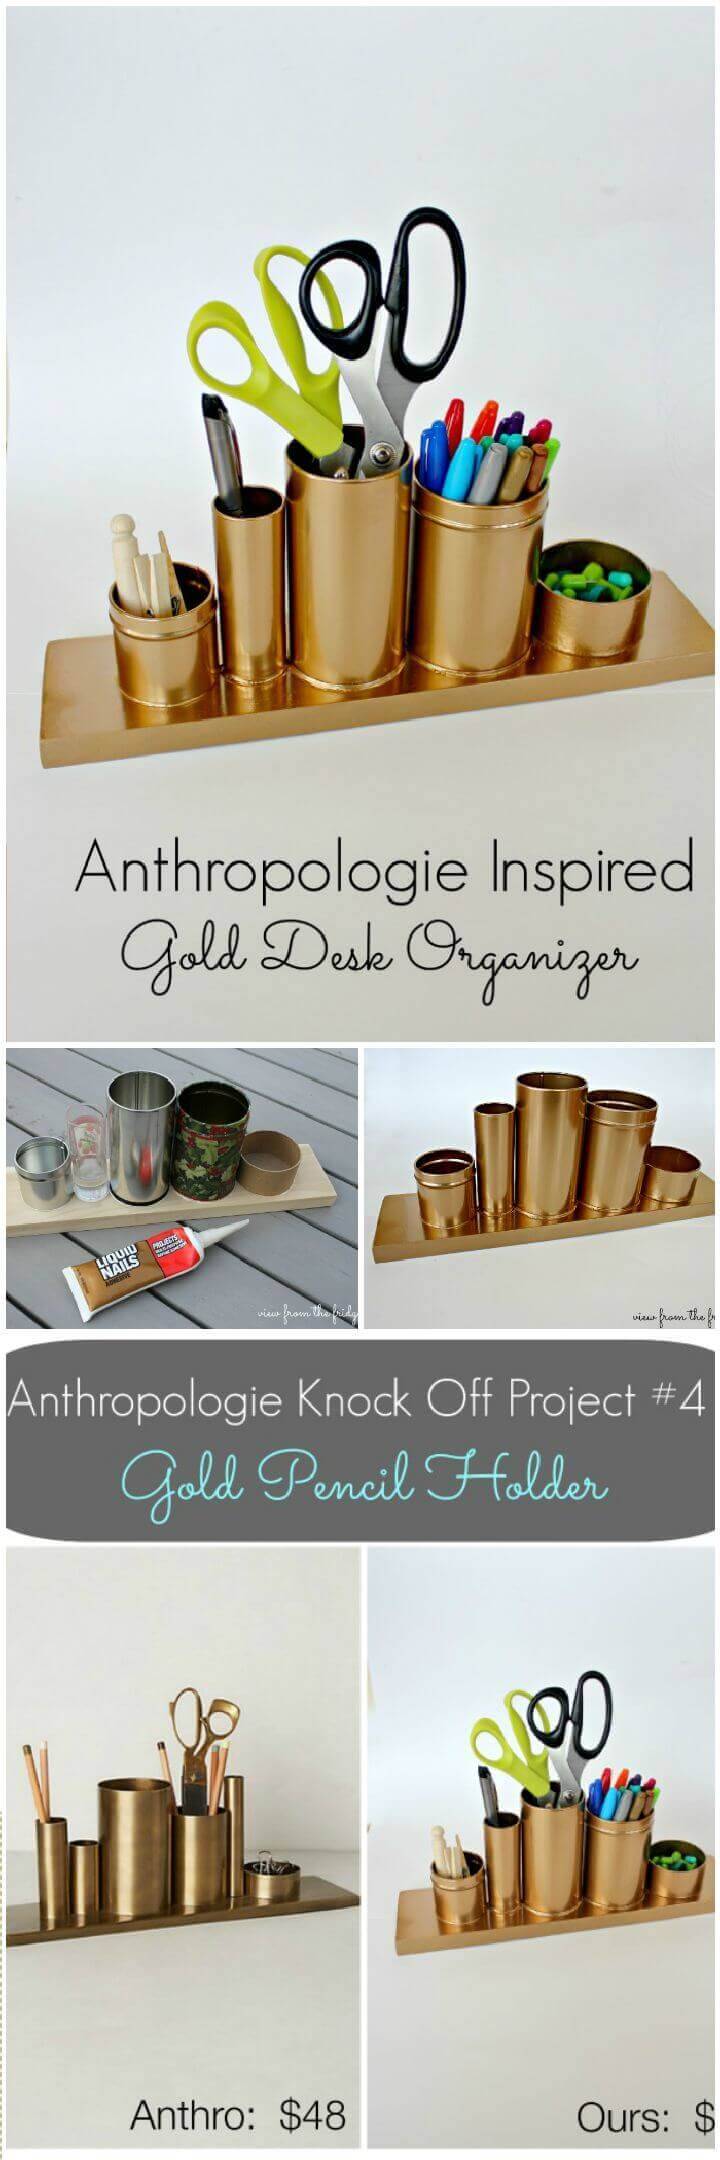 Gold Pencil Holder Anthro Knock Off